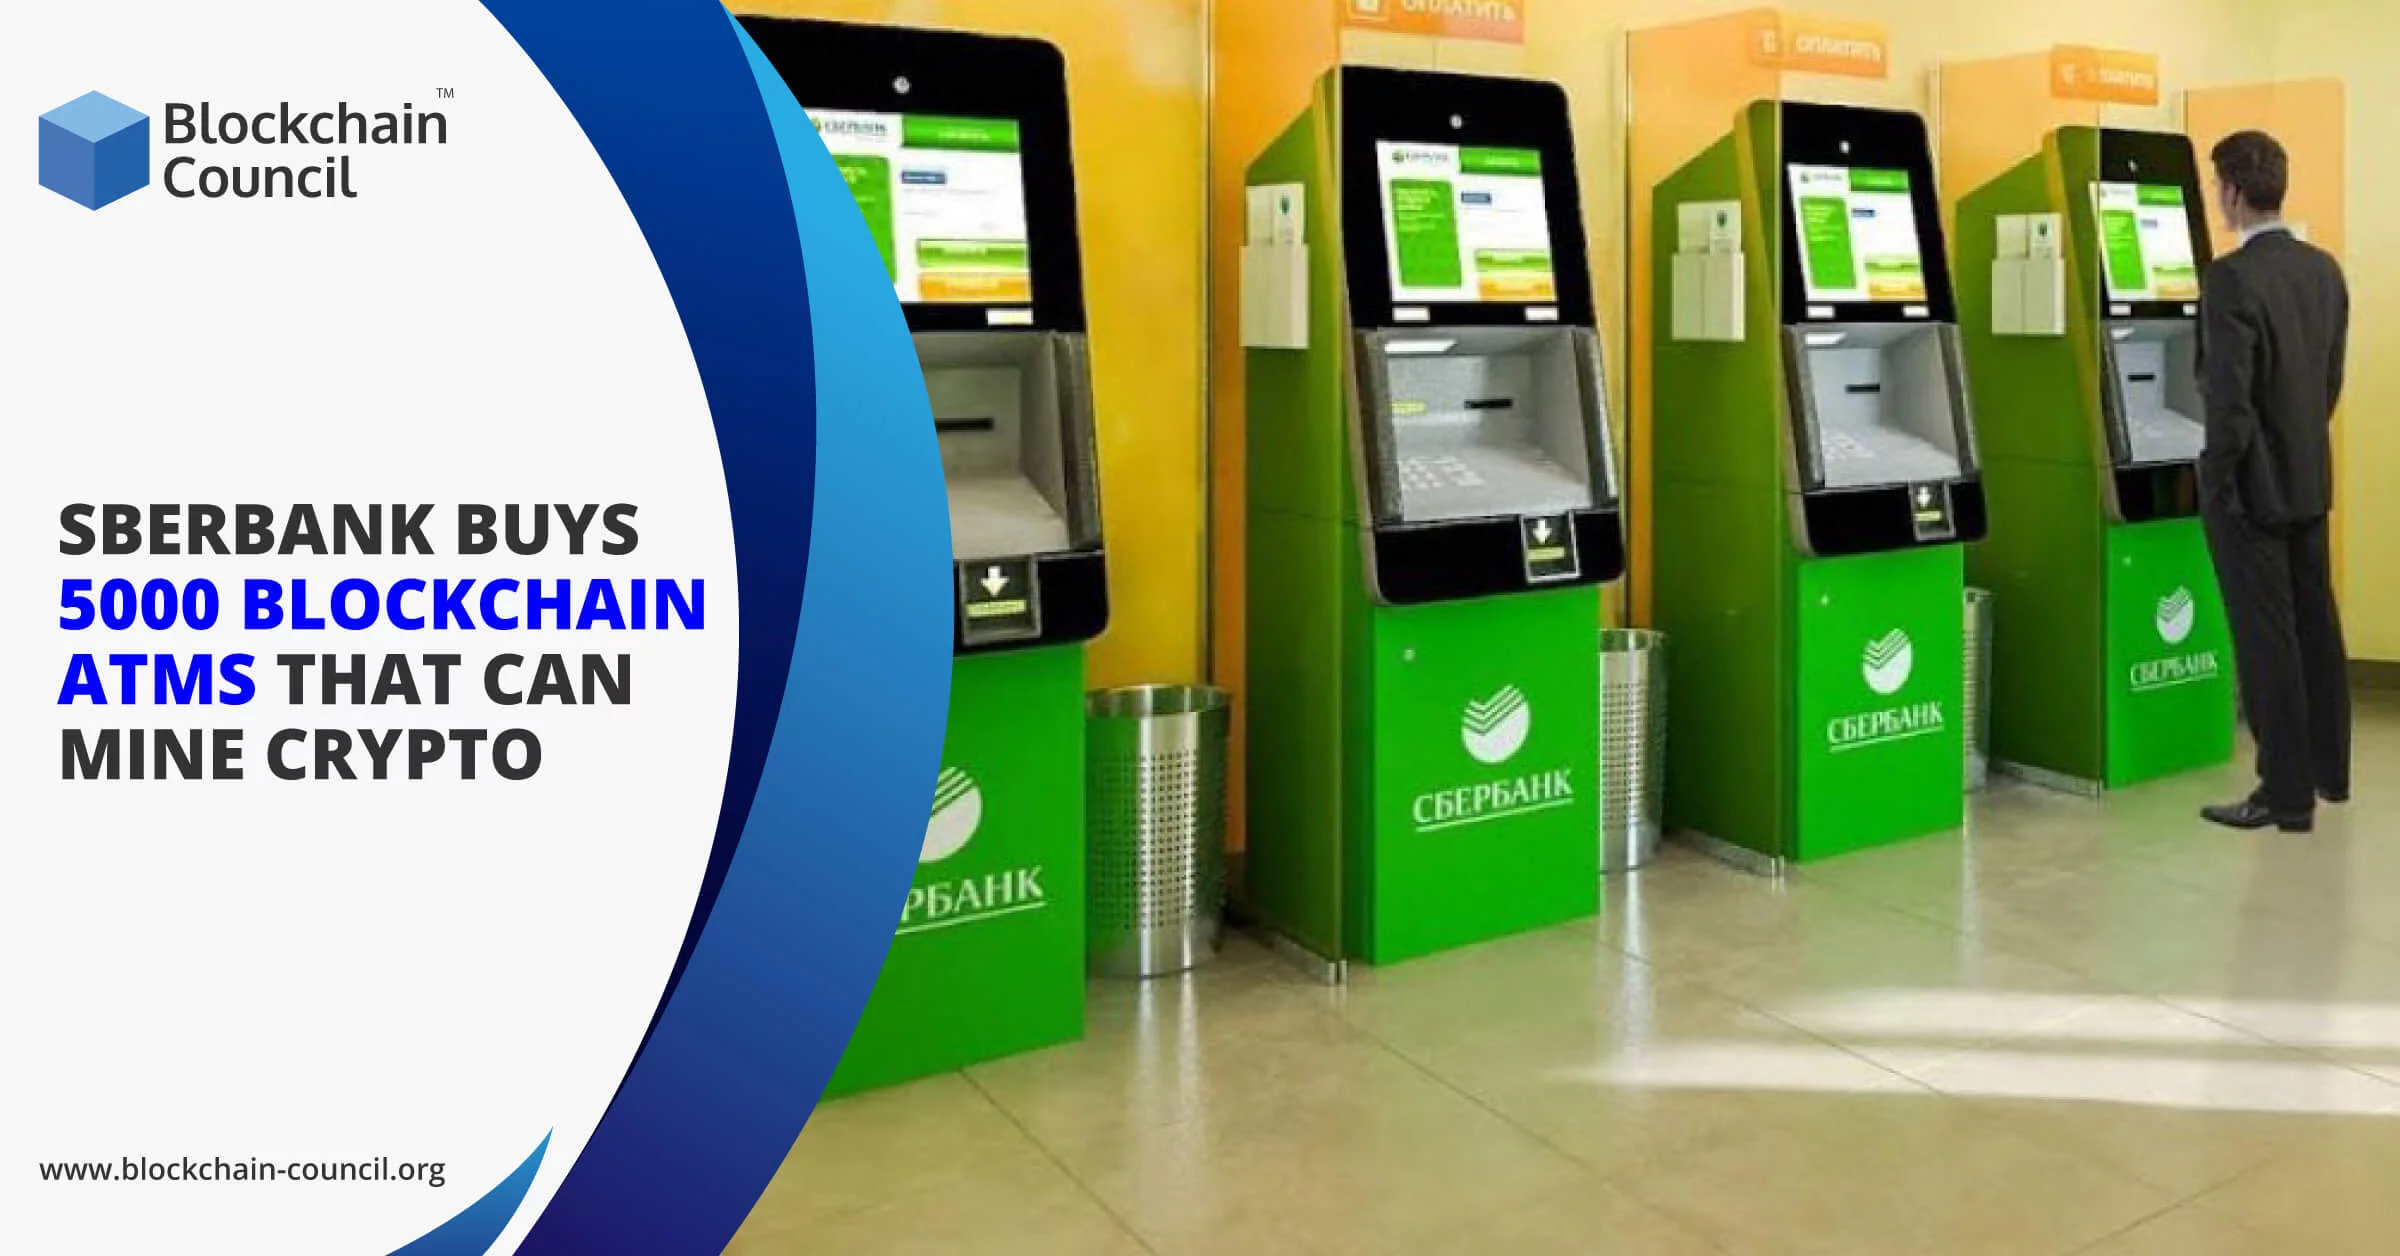 SBERBANK-Buys-5000-Blockchain-ATMs-that-can-Mine-Crypto